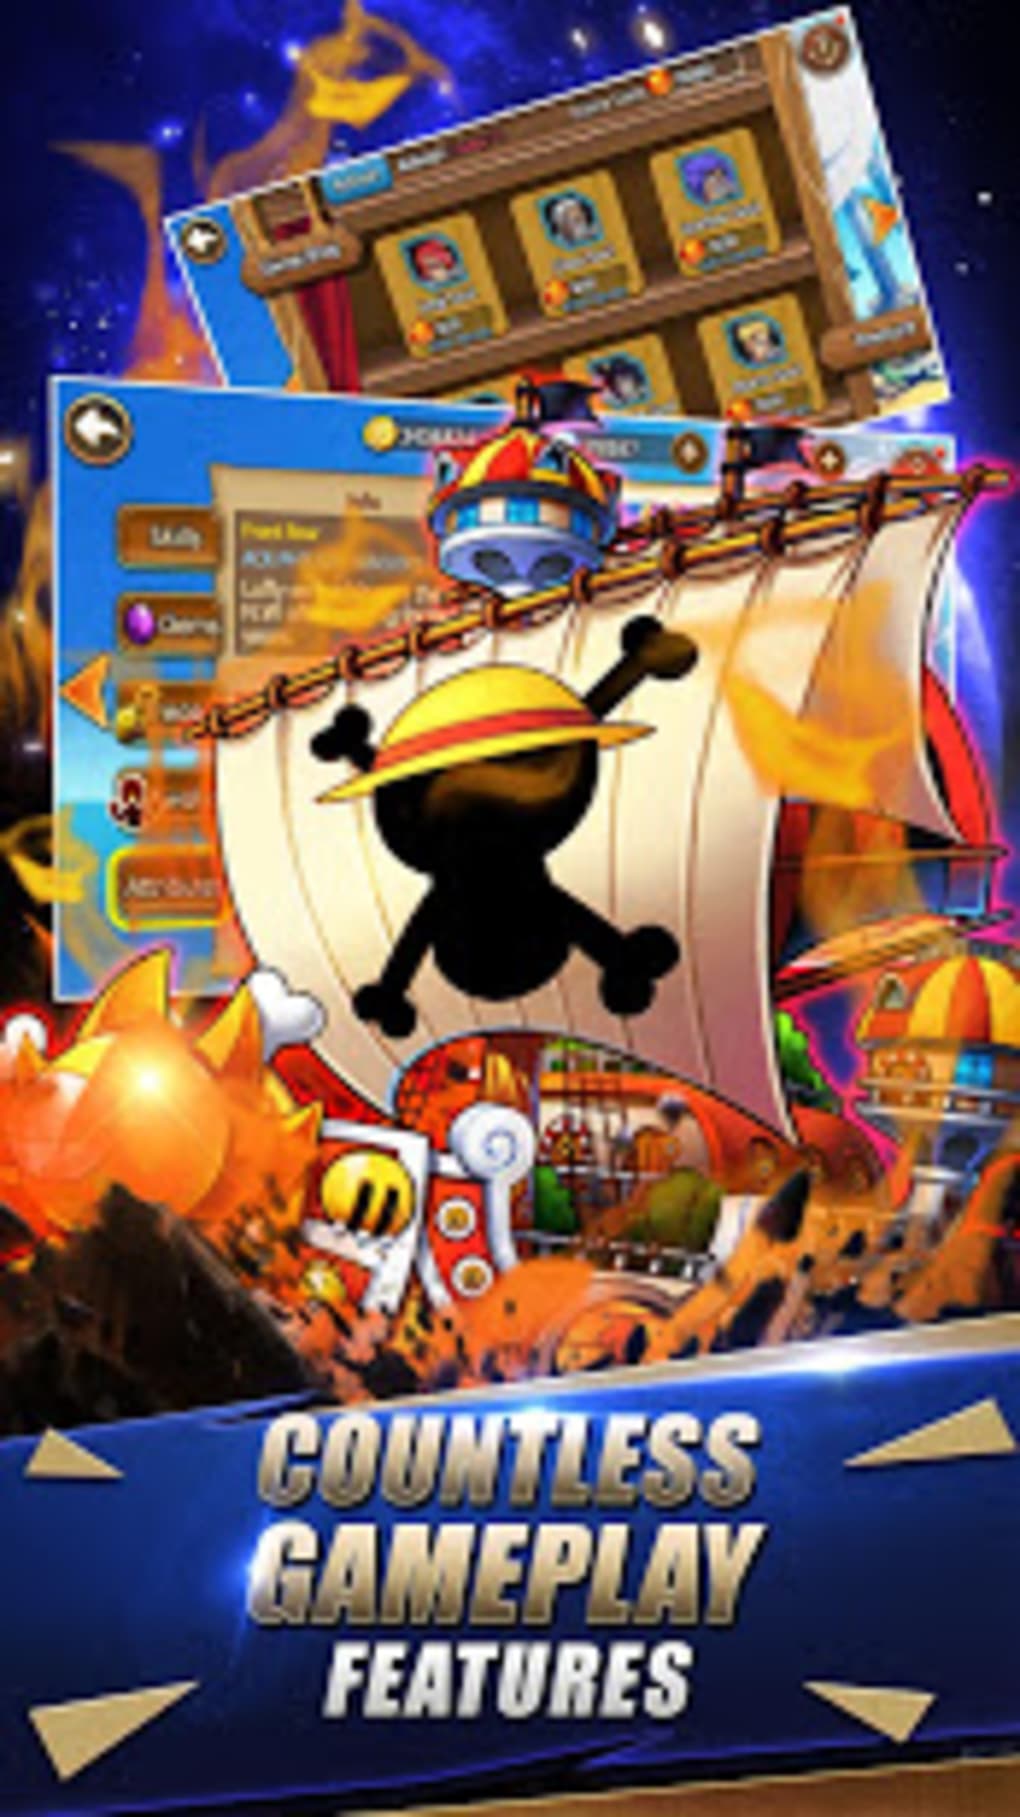 sunny pirates going merry codes, sunny pirates going merry codes, By  MahaGamer